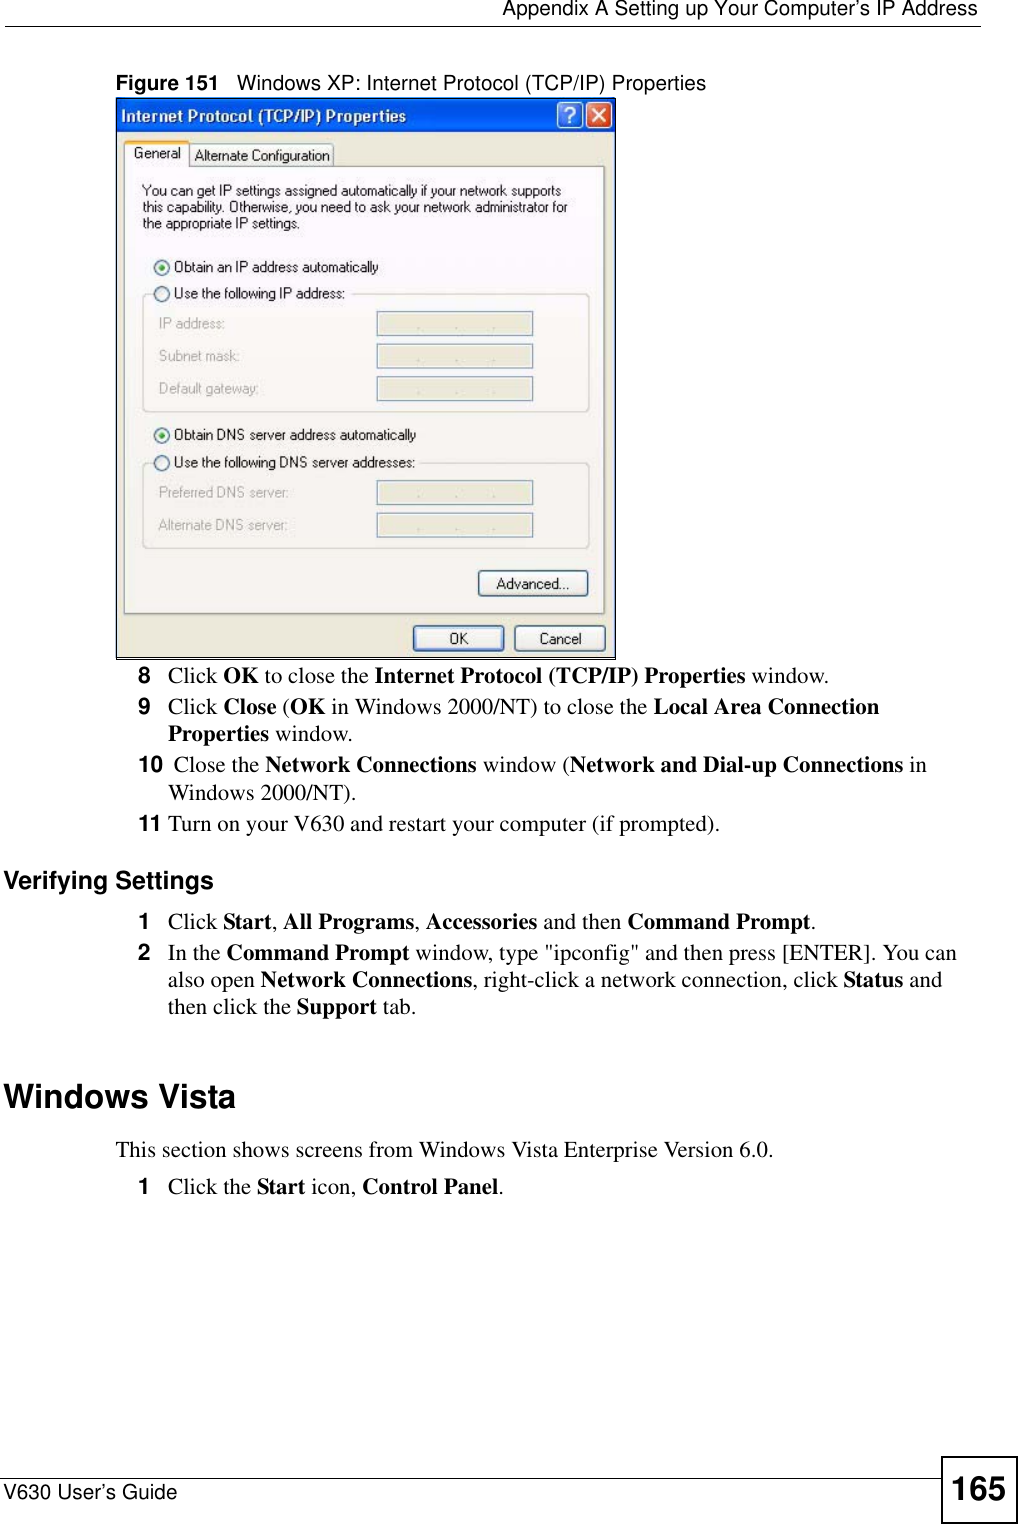  Appendix A Setting up Your Computer’s IP AddressV630 User’s Guide 165Figure 151   Windows XP: Internet Protocol (TCP/IP) Properties8Click OK to close the Internet Protocol (TCP/IP) Properties window.9Click Close (OK in Windows 2000/NT) to close the Local Area Connection Properties window.10  Close the Network Connections window (Network and Dial-up Connections in Windows 2000/NT).11 Turn on your V630 and restart your computer (if prompted).Verifying Settings1Click Start, All Programs, Accessories and then Command Prompt.2In the Command Prompt window, type &quot;ipconfig&quot; and then press [ENTER]. You can also open Network Connections, right-click a network connection, click Status and then click the Support tab.Windows VistaThis section shows screens from Windows Vista Enterprise Version 6.0.1Click the Start icon, Control Panel.